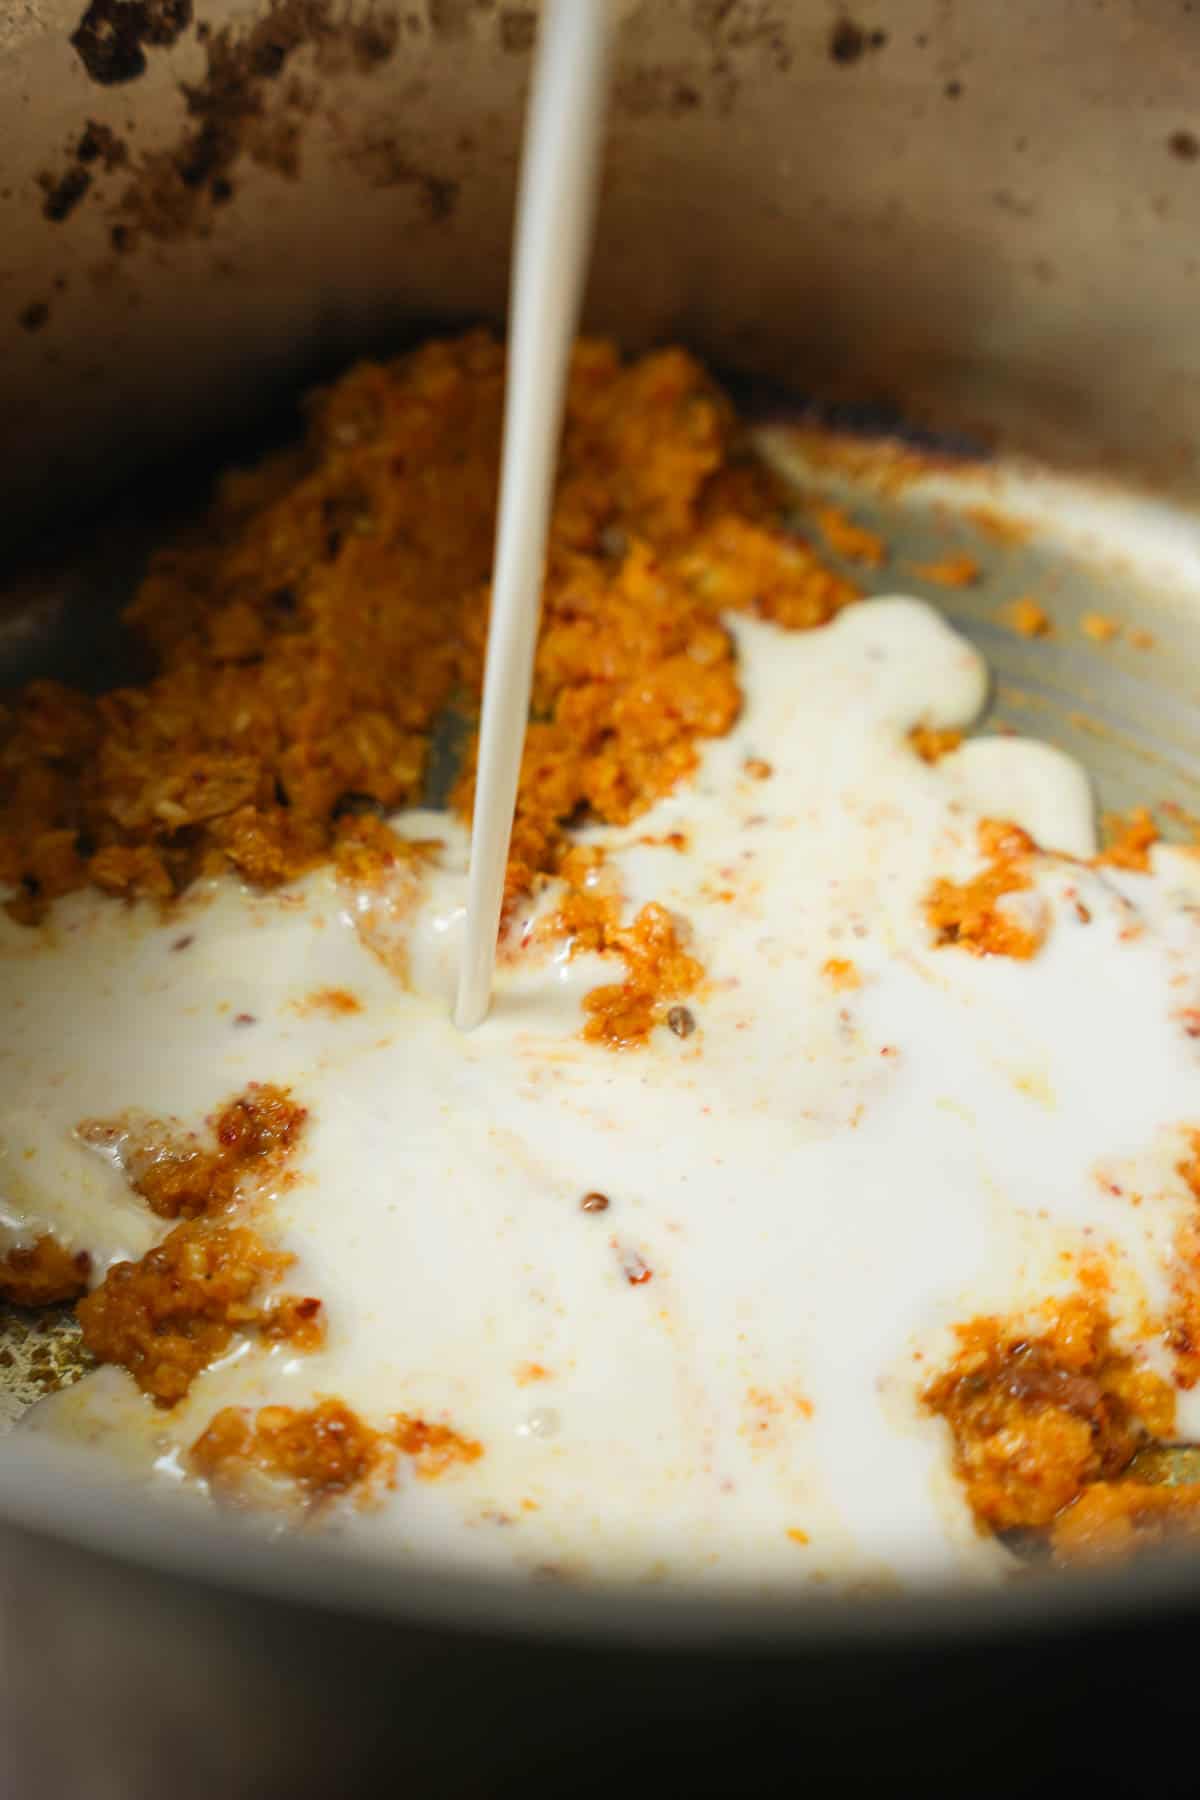 Coconut milk is added to the fried curry paste in a stainless steel pot.